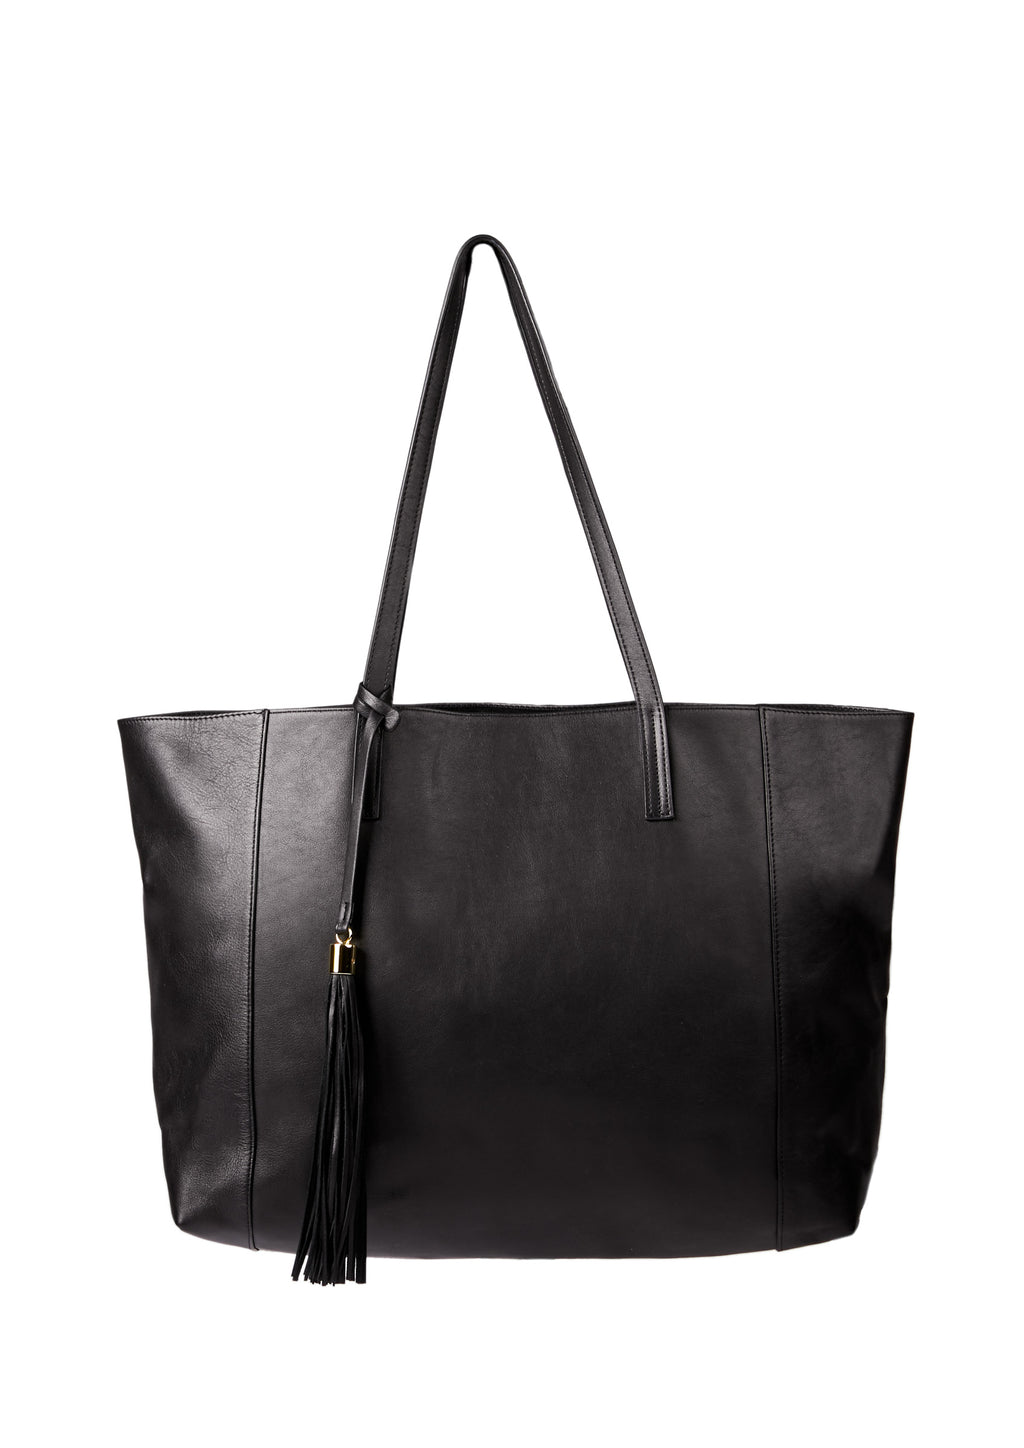 Black Classic Leather Tote Bag